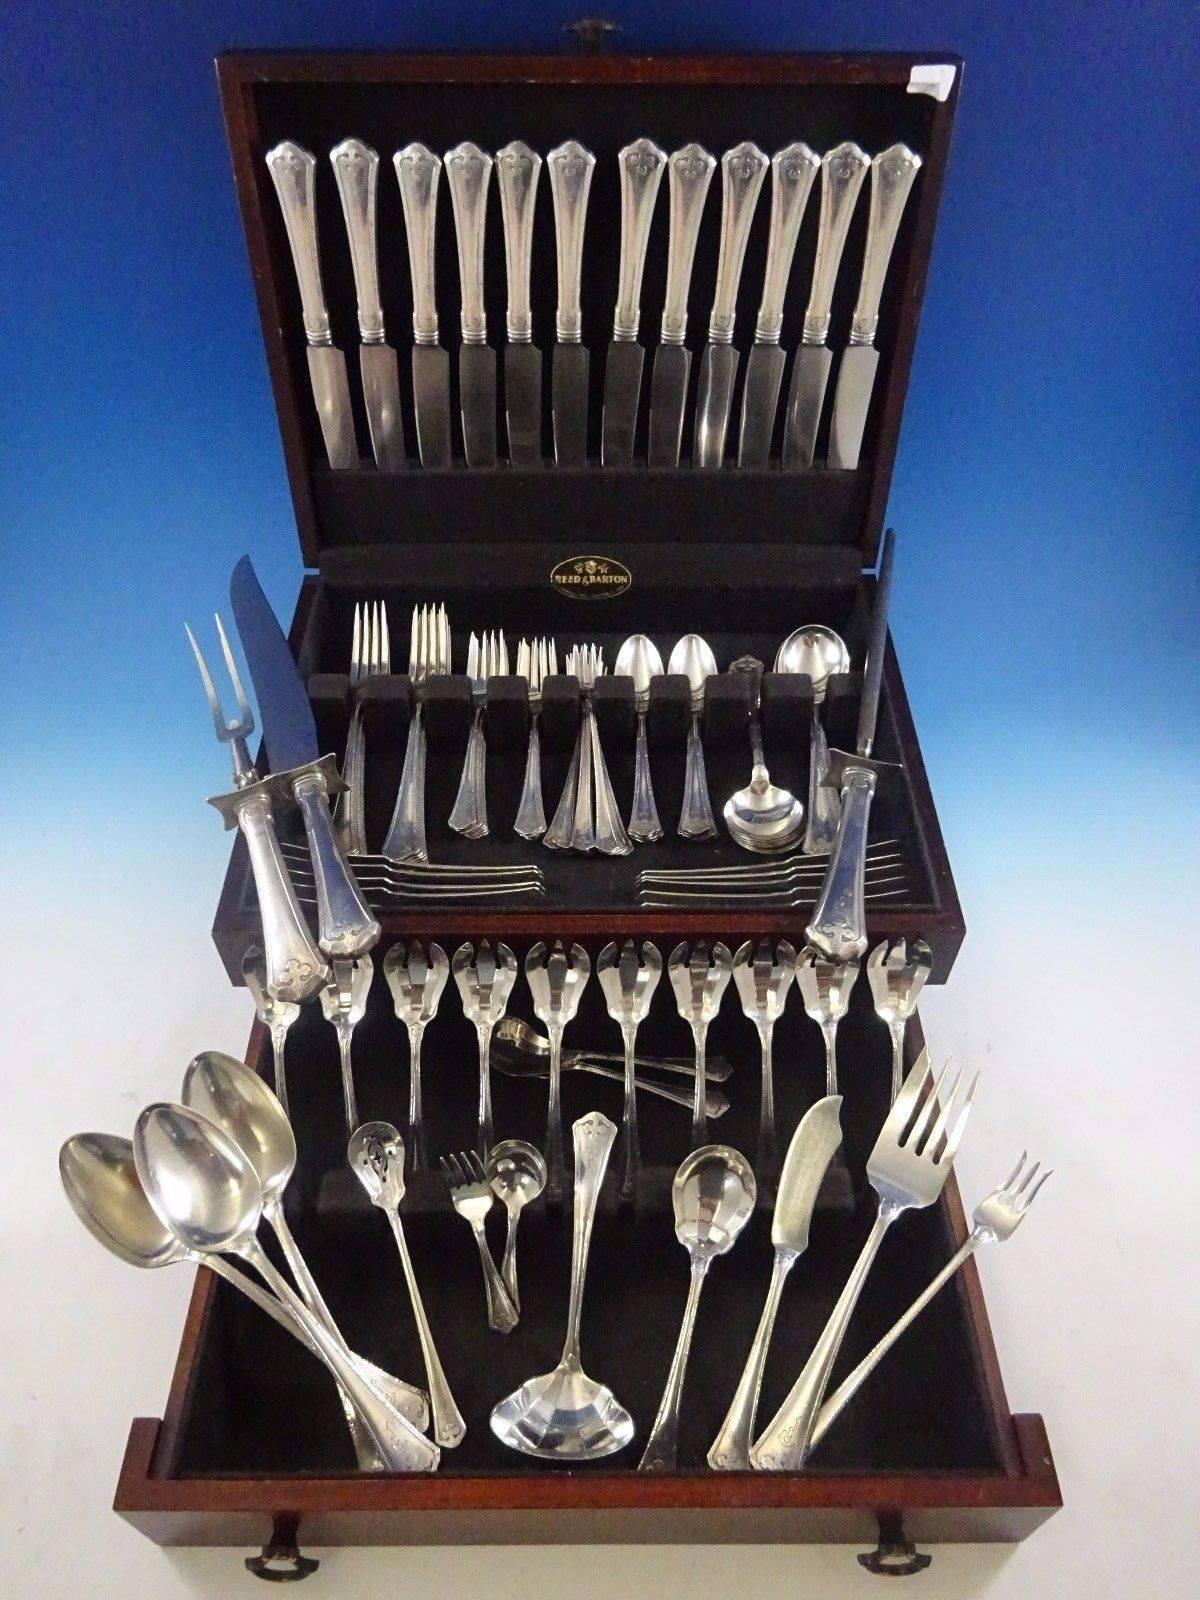 Carmel by Wallace sterling silver dinner size flatware set of 110 pieces. This set includes:

 
12 dinner knives, 9 3/4